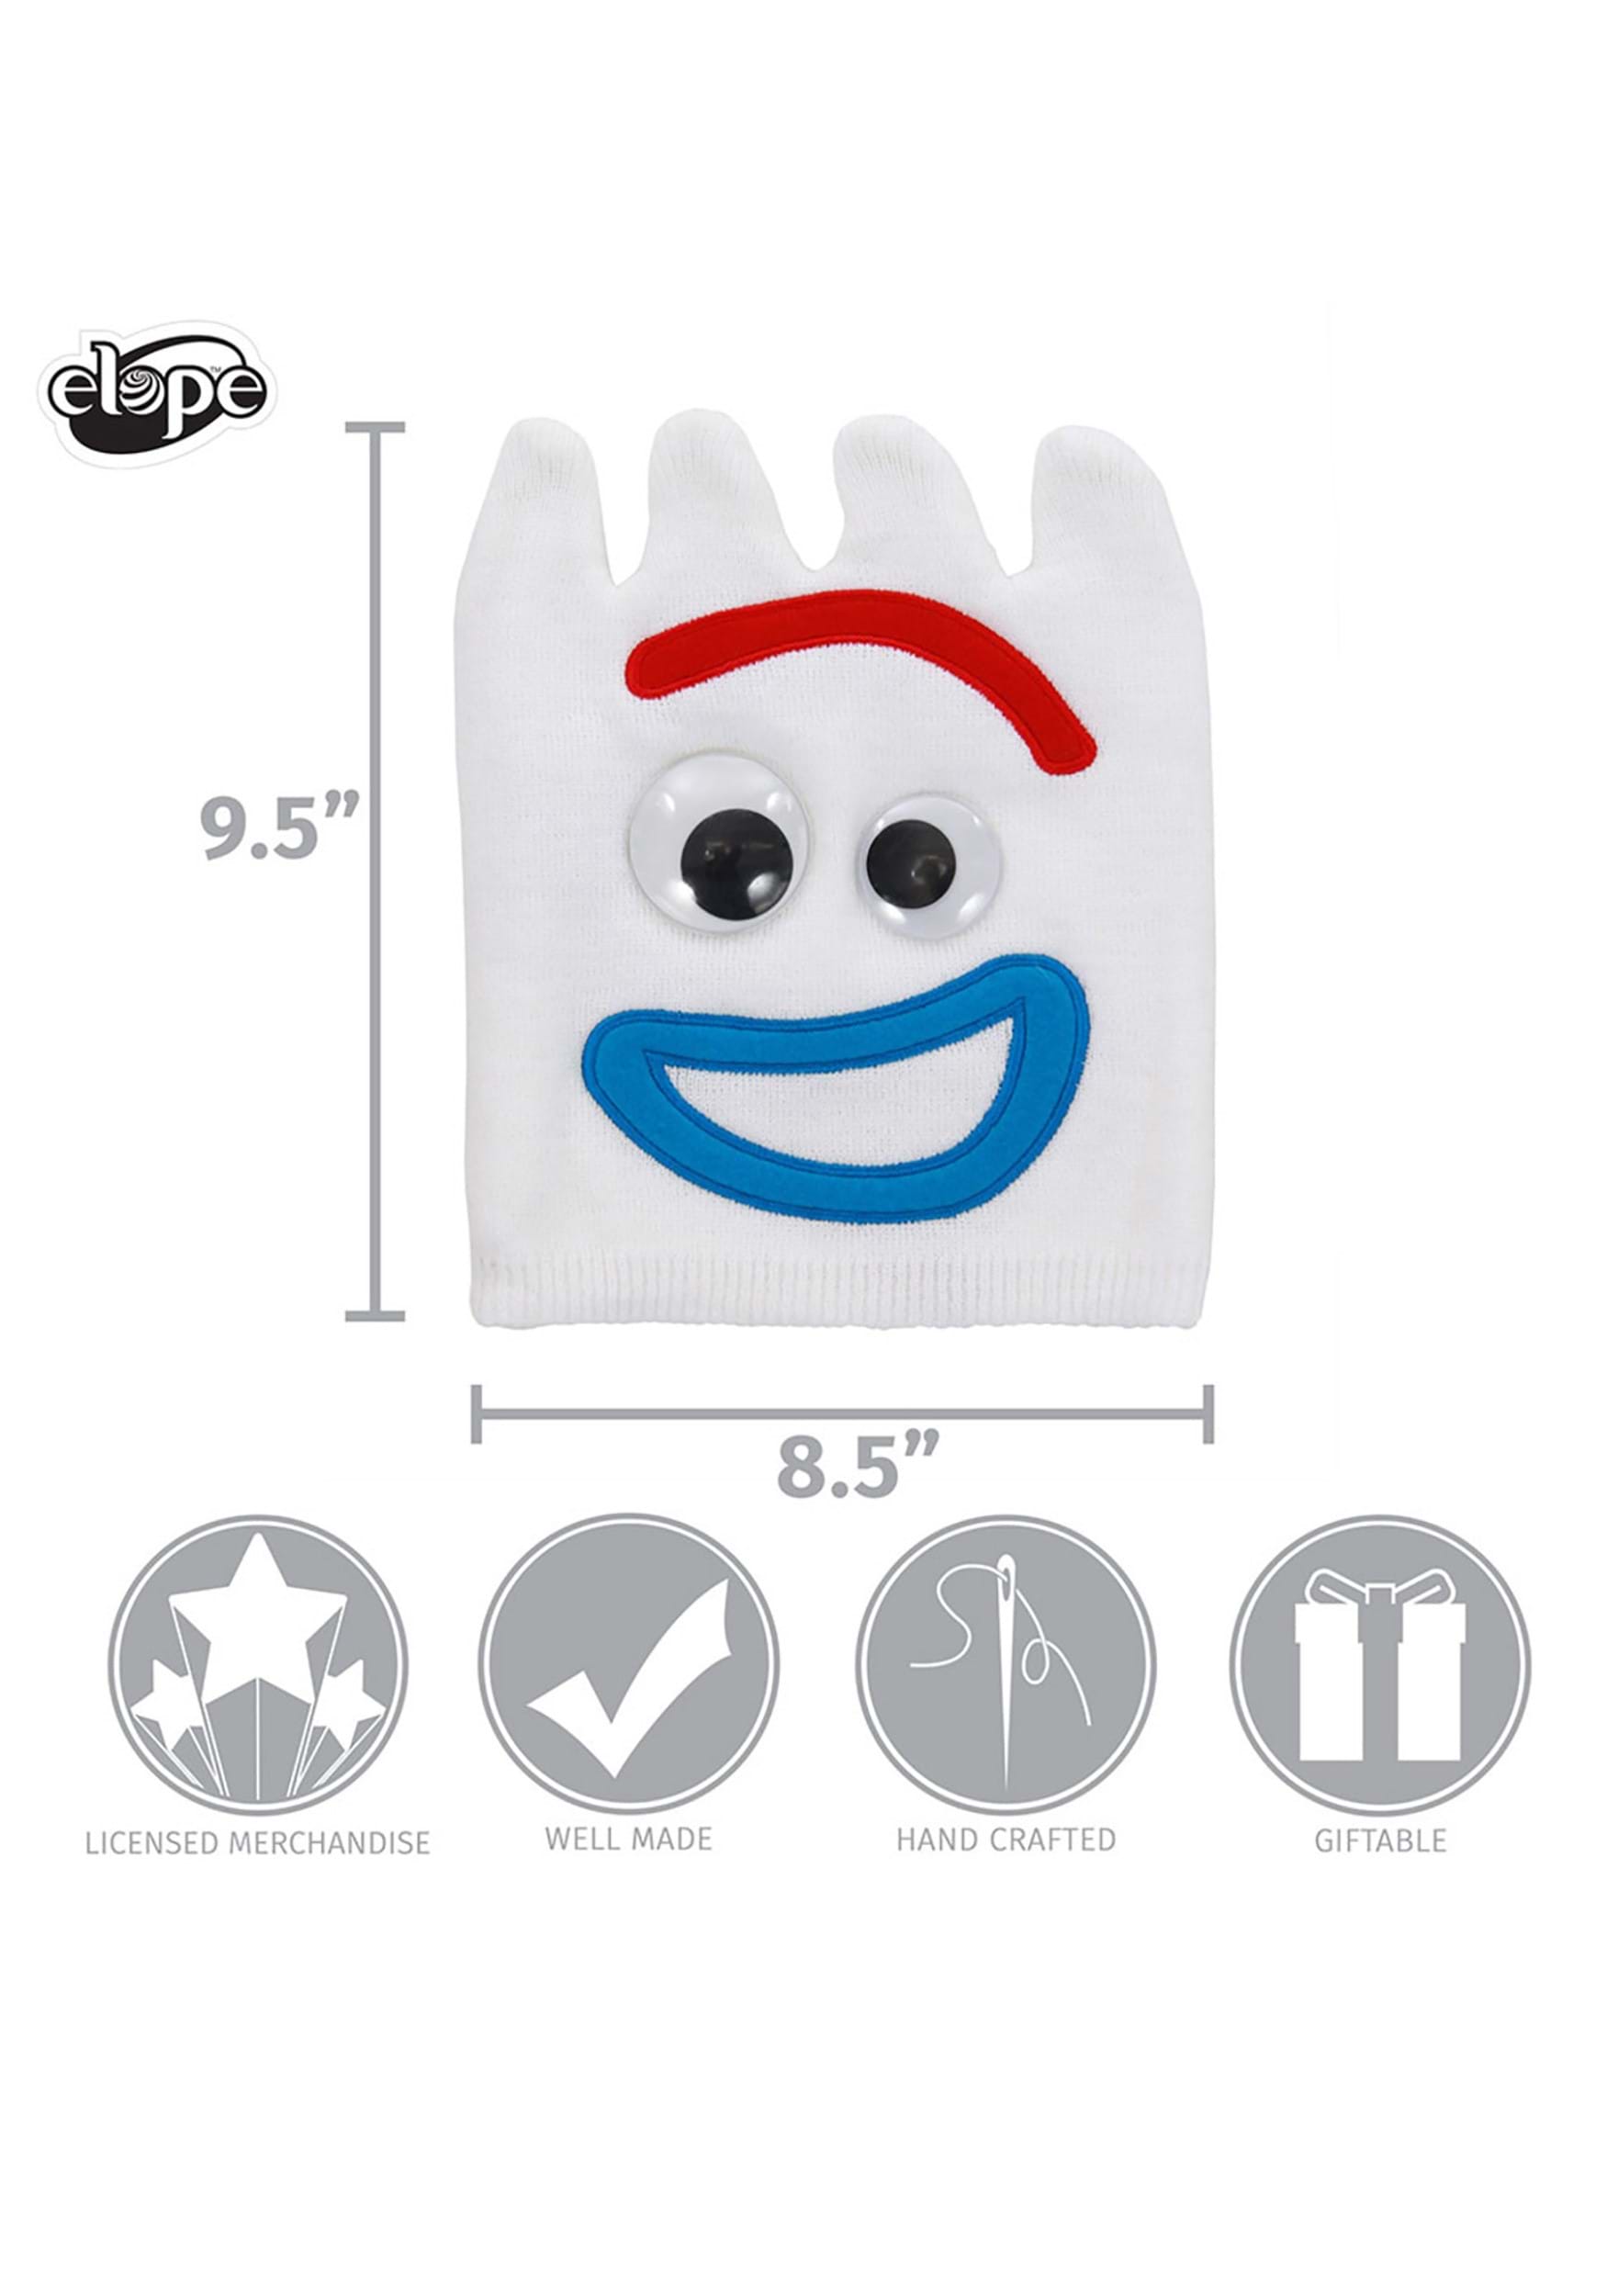 Kid's Forky Knit Costume Hat